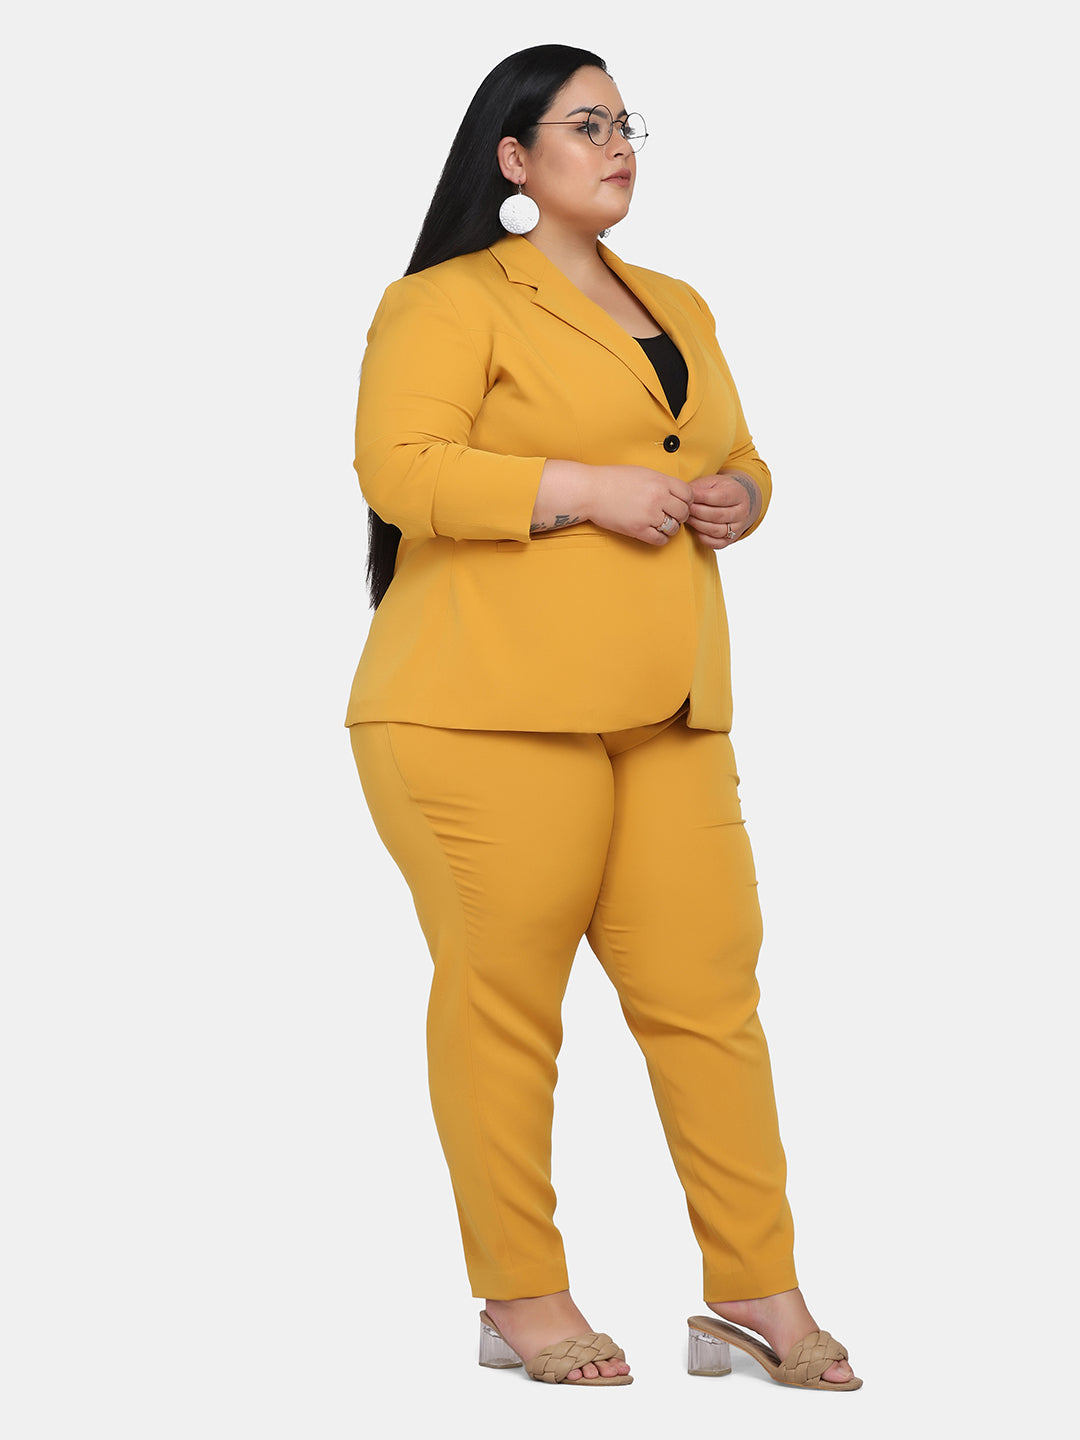 Women’s Formal Pant Suit For Work- Mustard Yellow